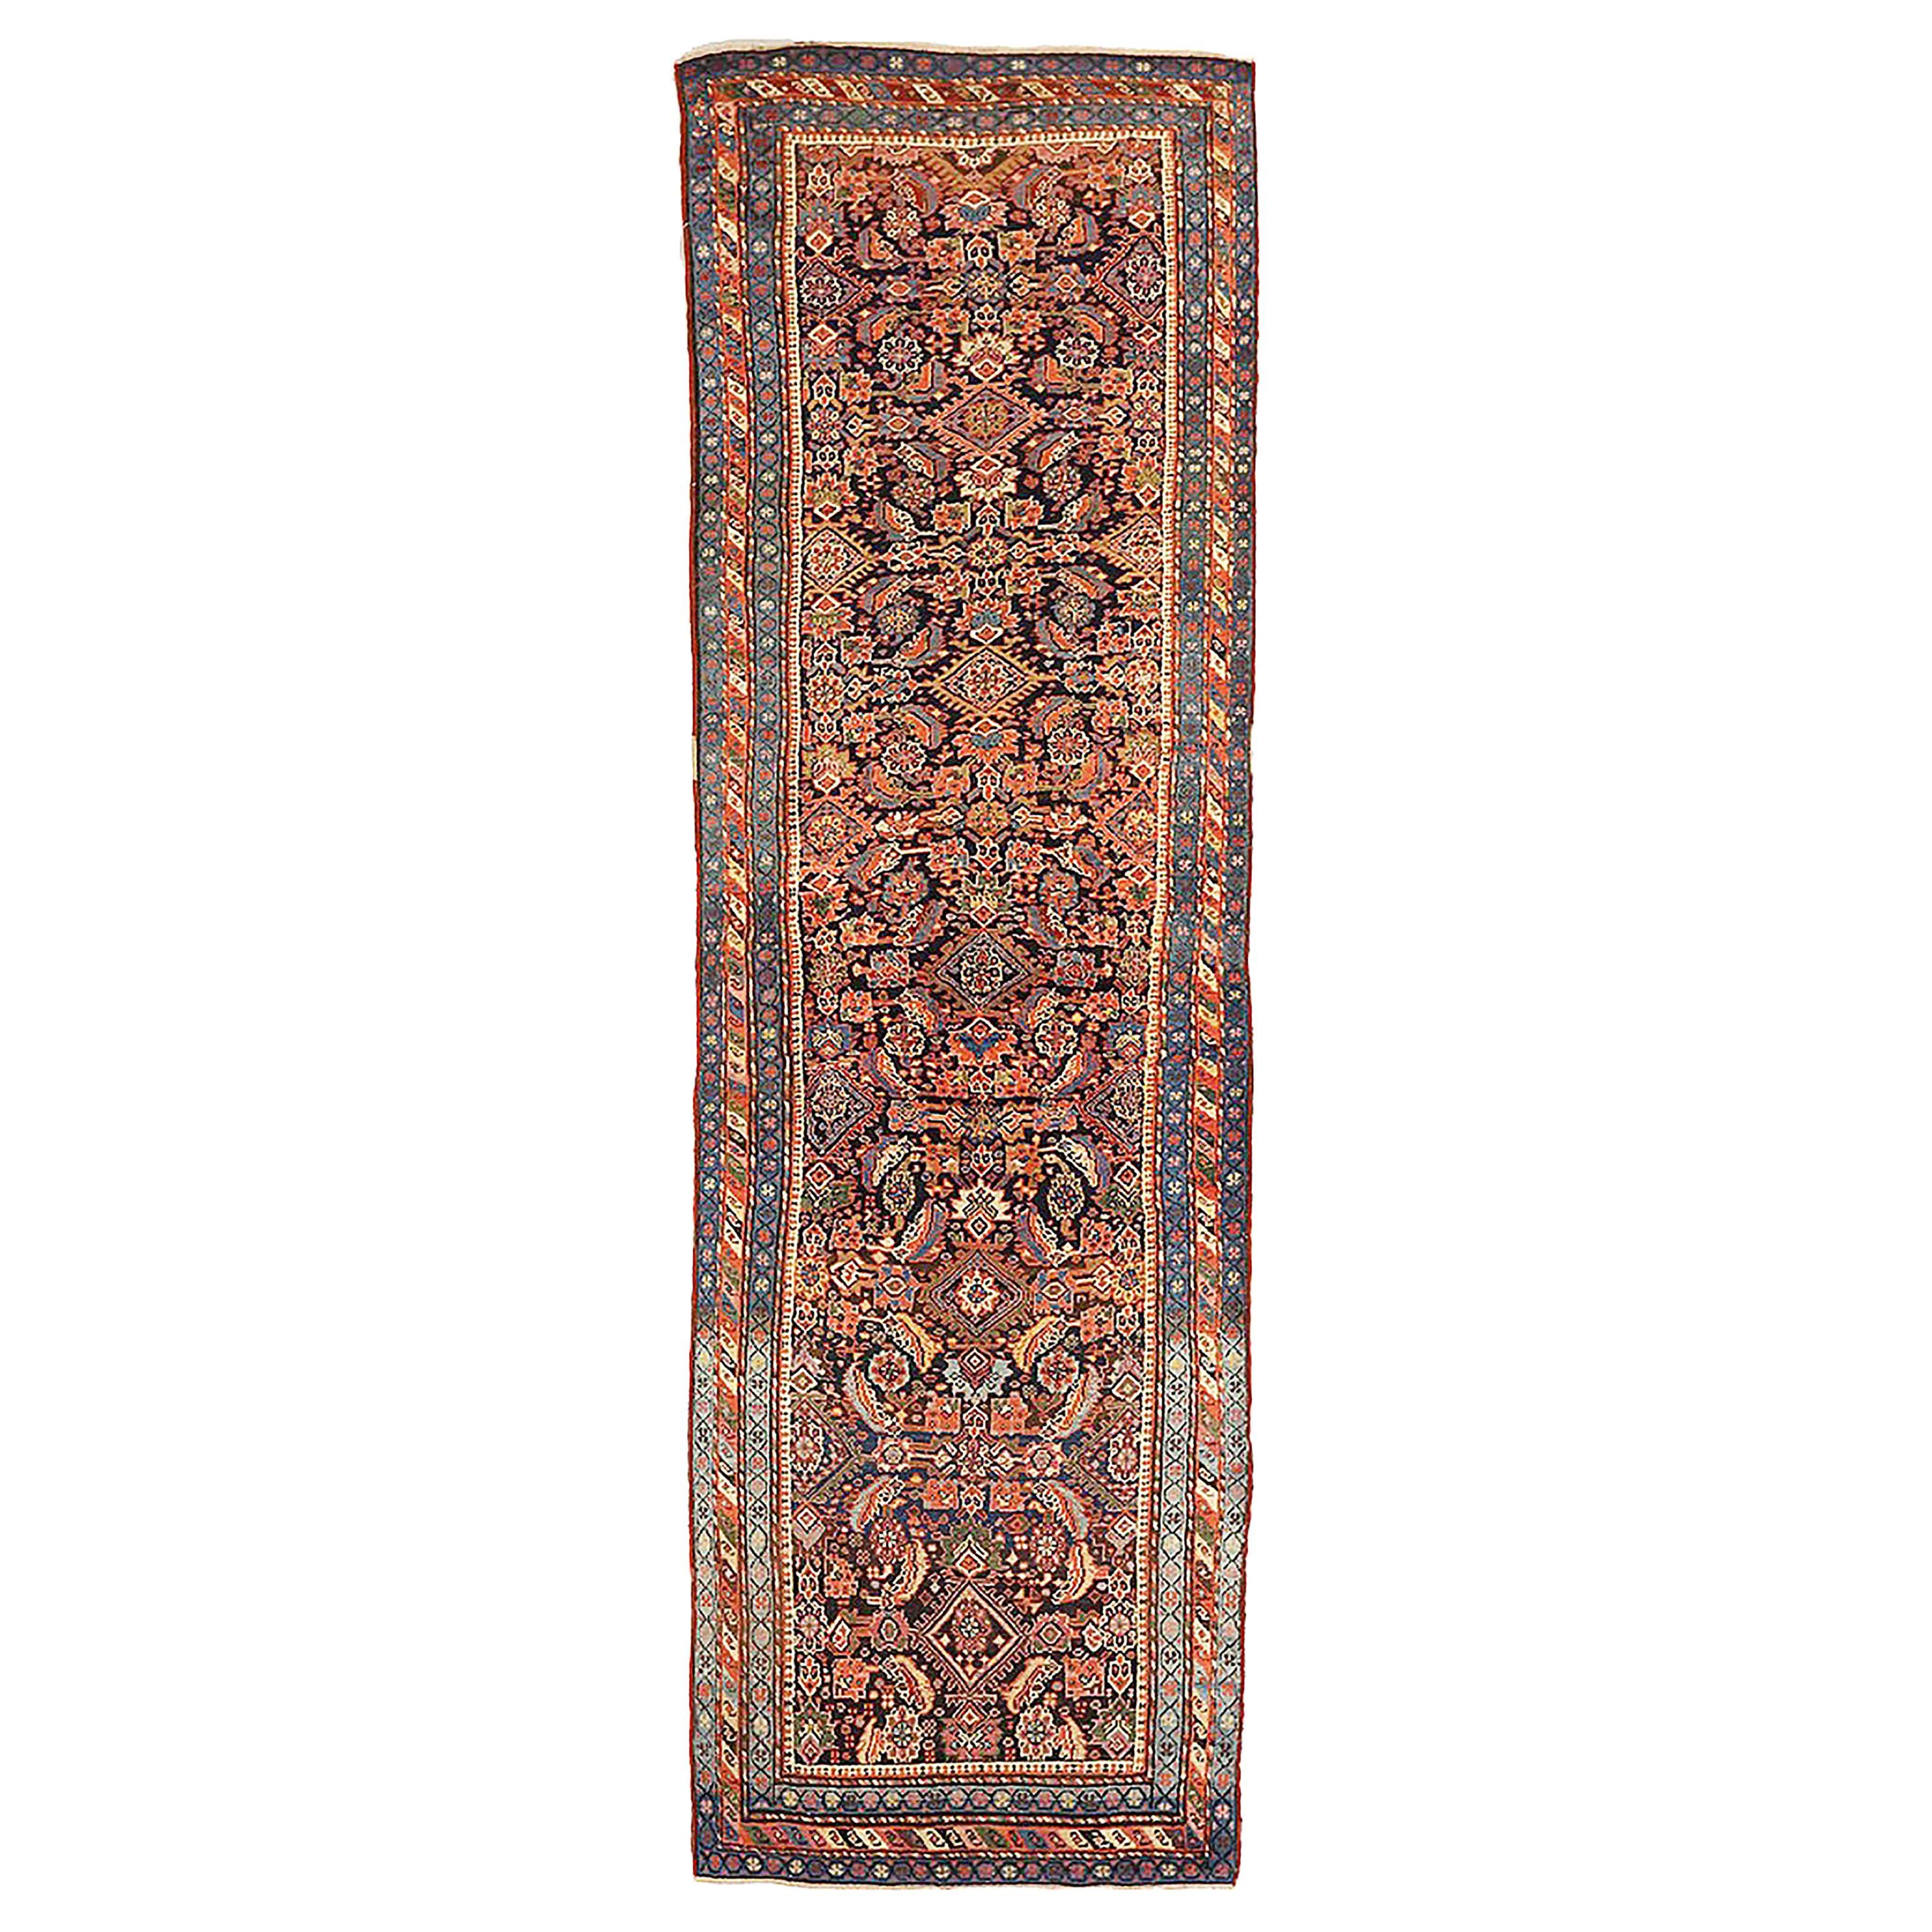 Antique Persian Azerbaijan Runner Rug with Ivory and Blue Floral Details